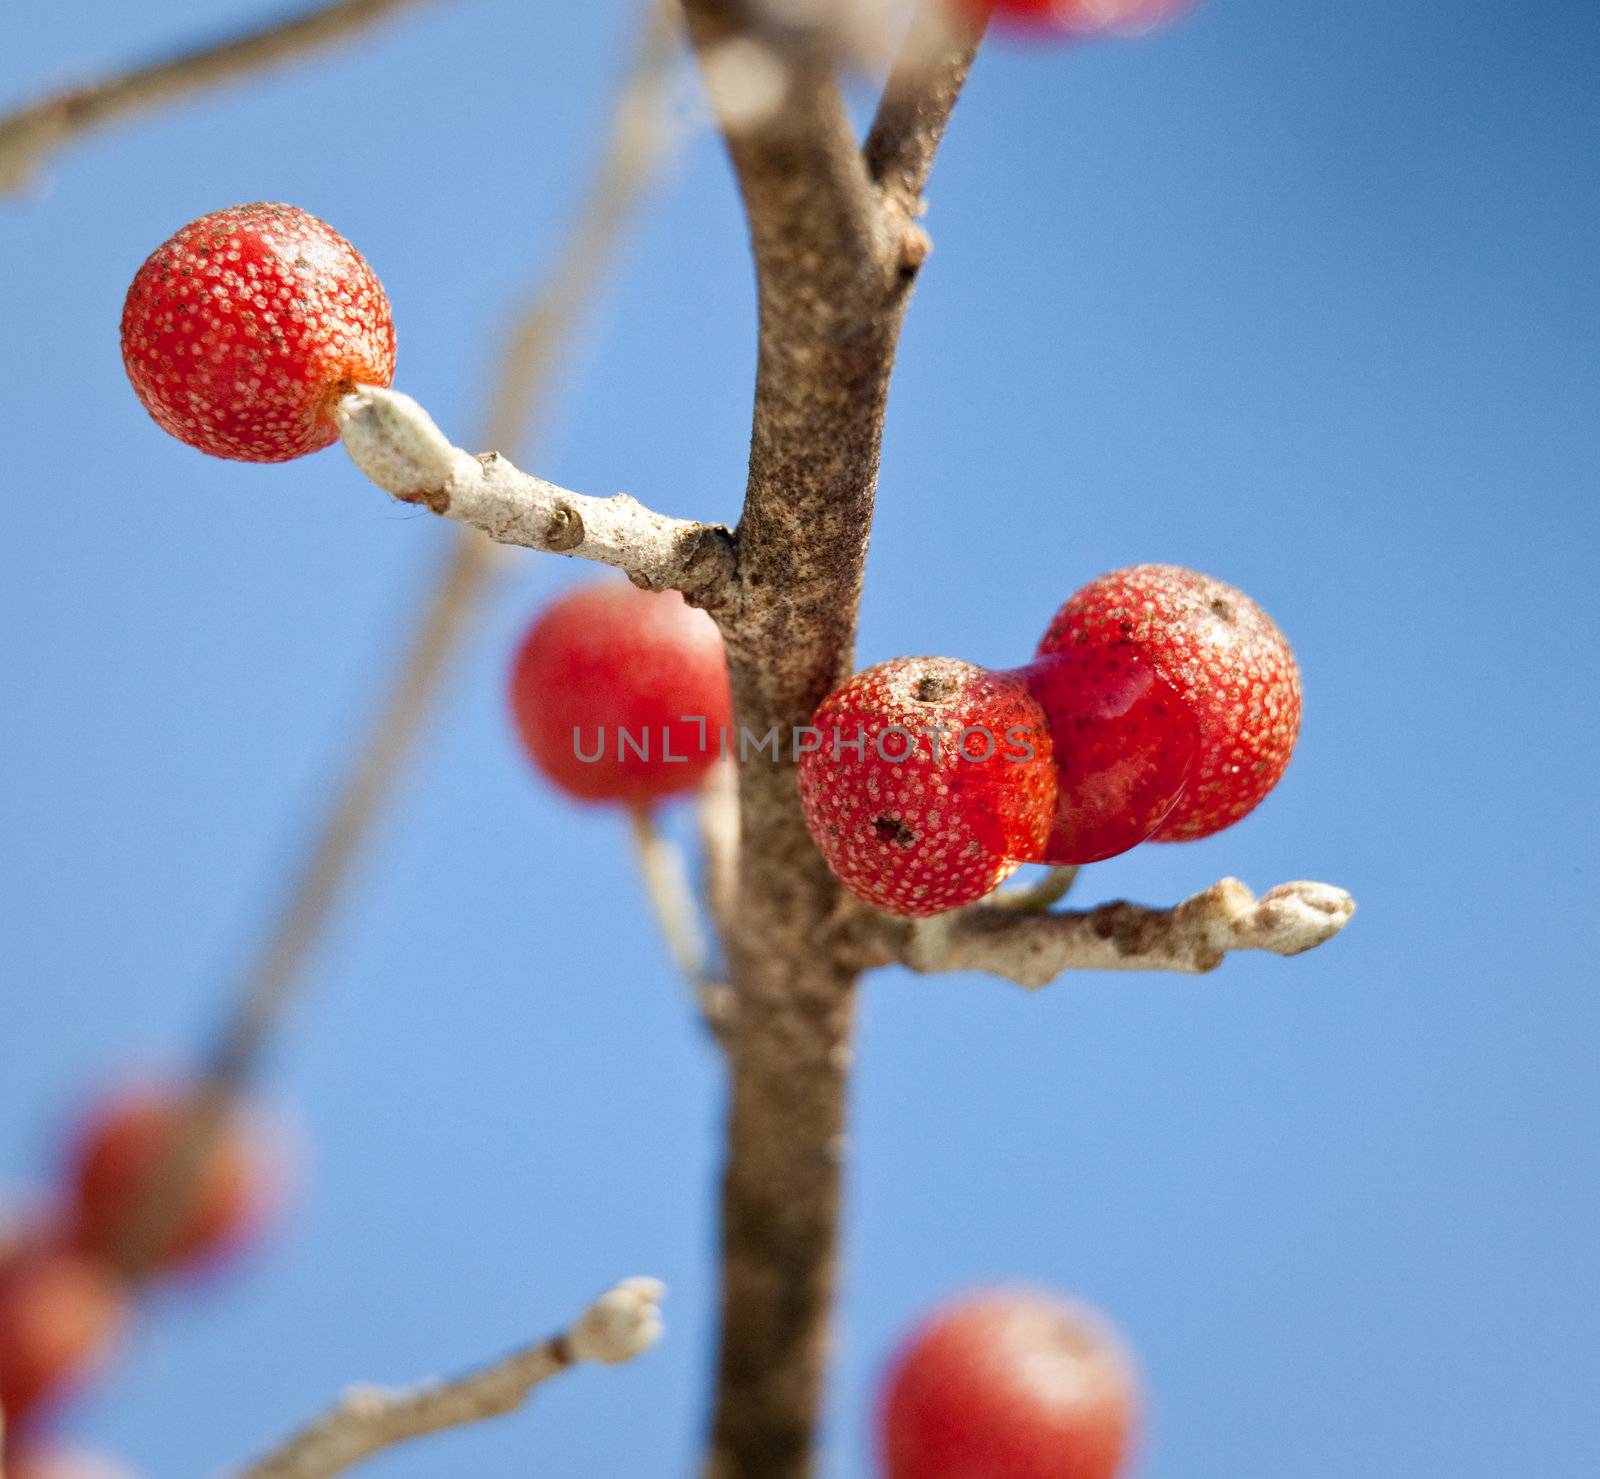 Red berry against a ice crystals by steheap